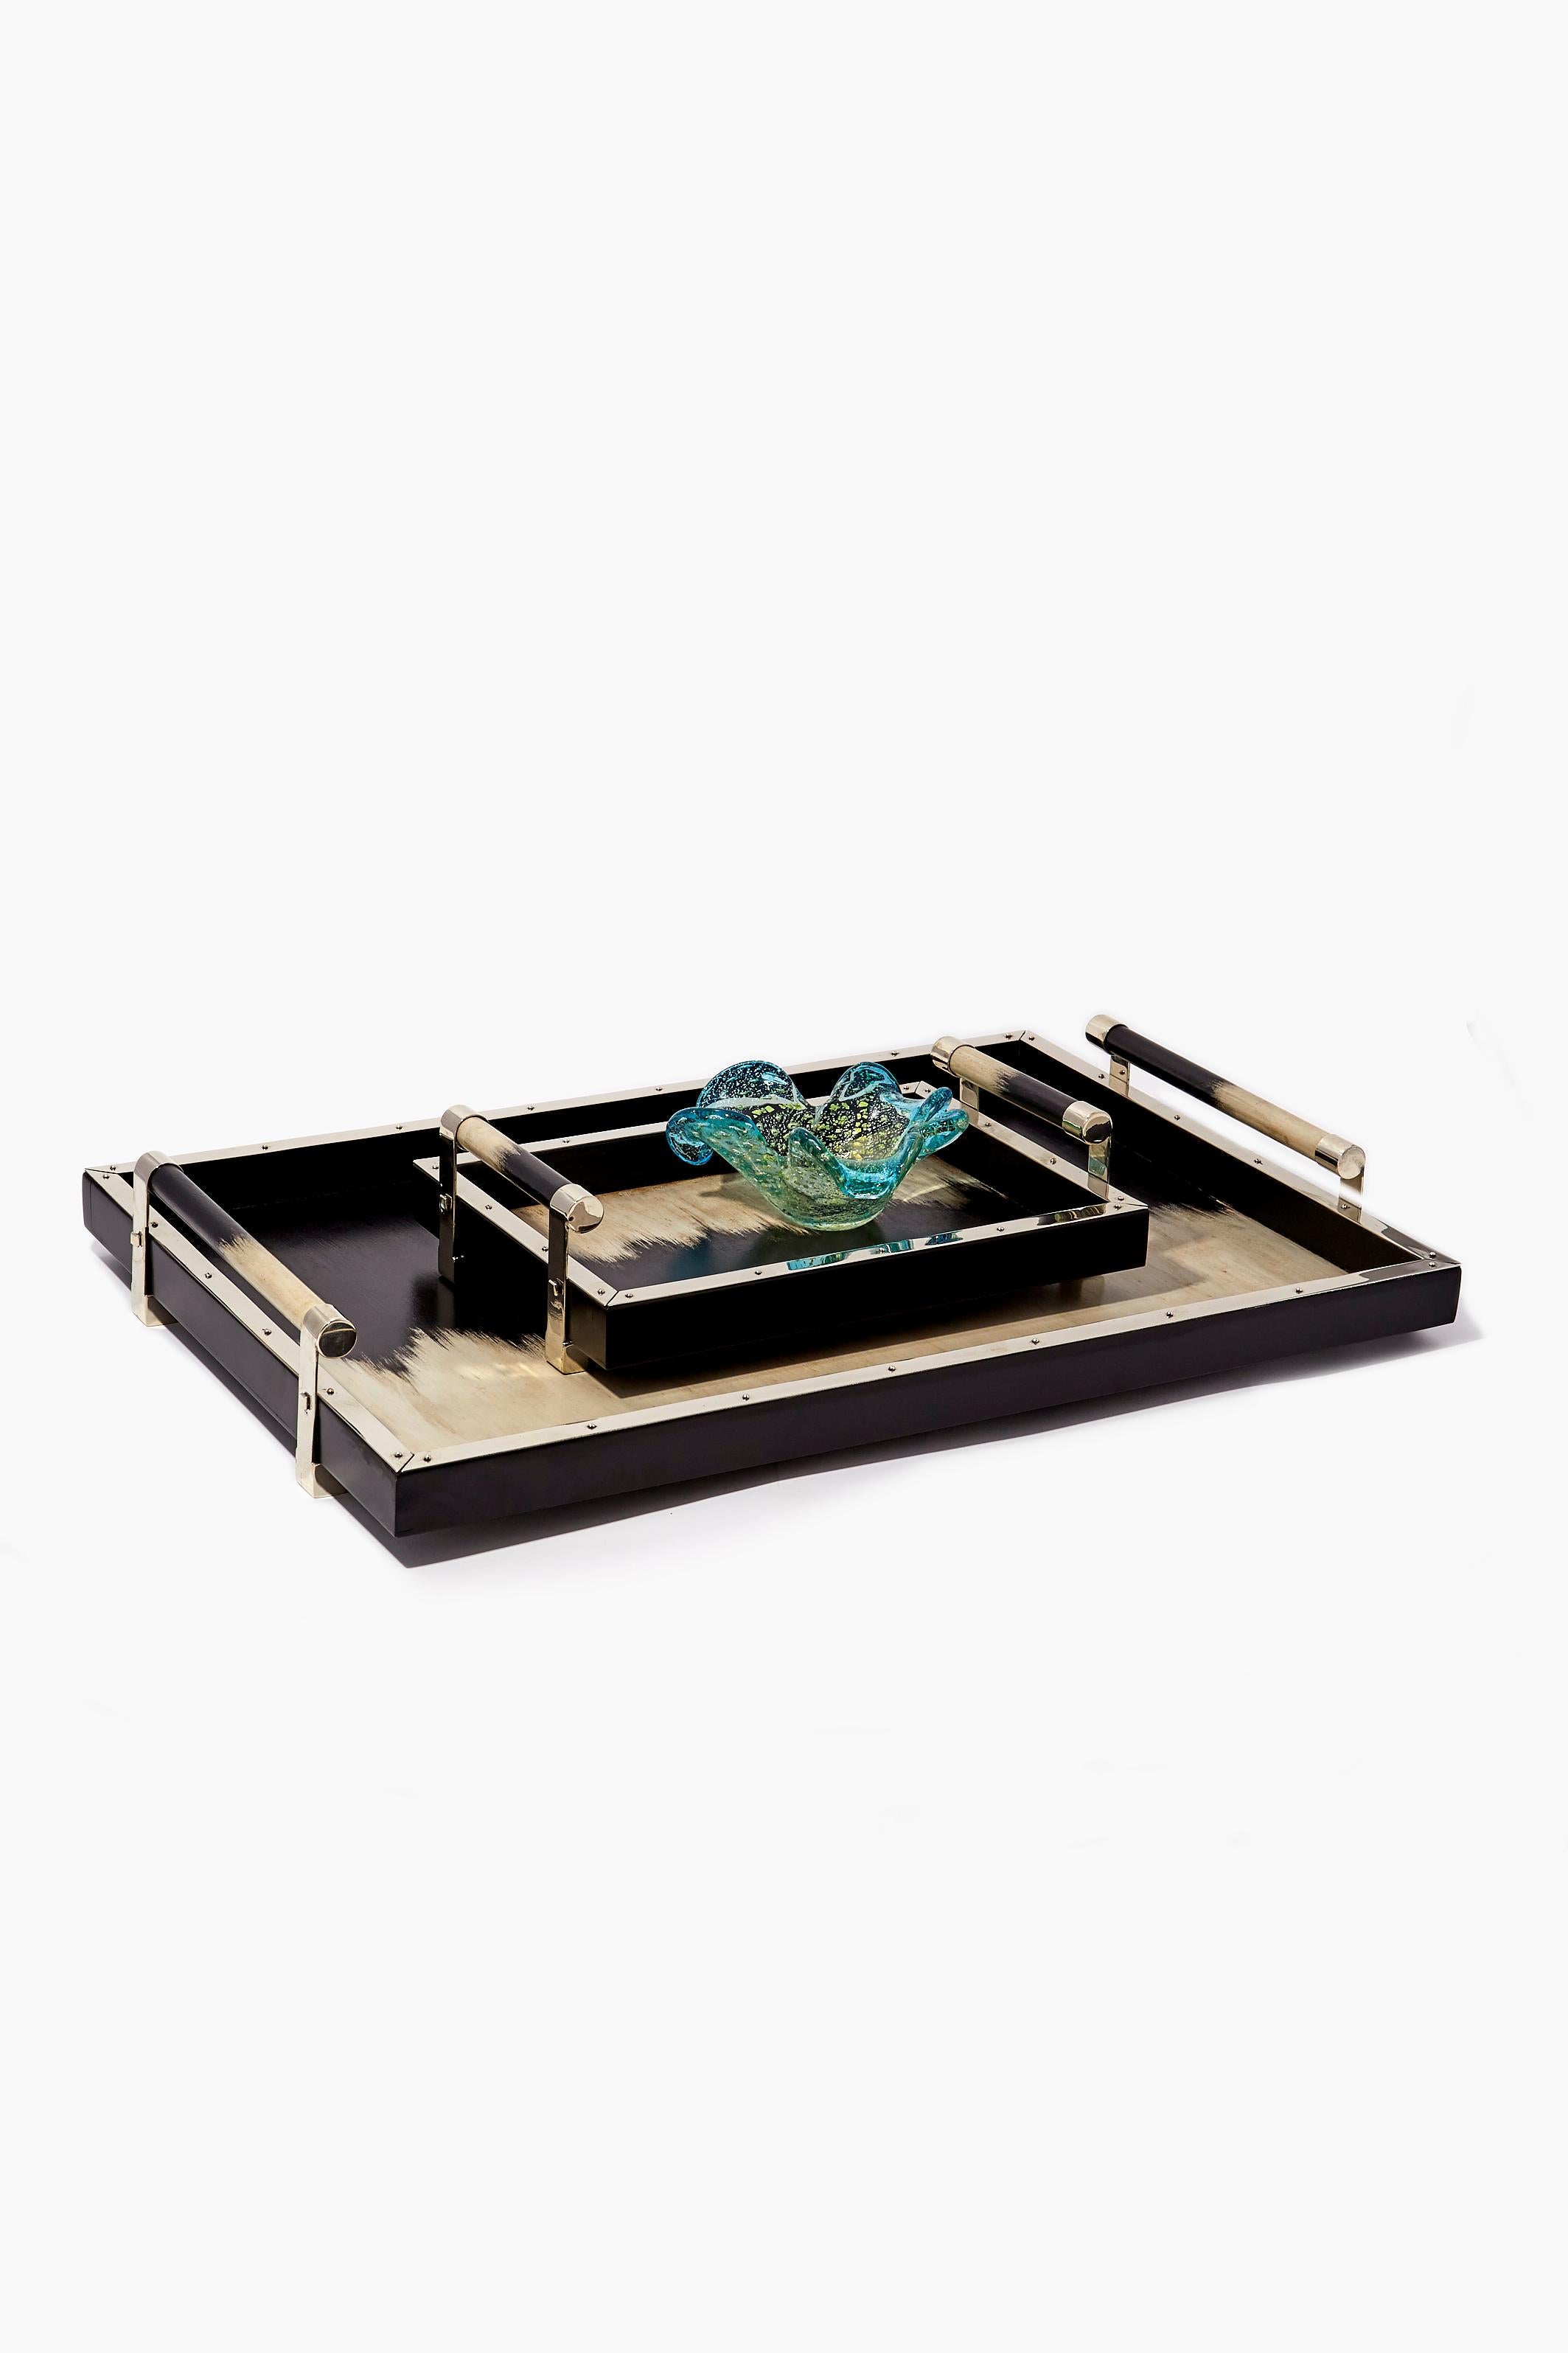 Modern PORTEÑO Small Black & Cream Hand Painted Wood Tray For Sale